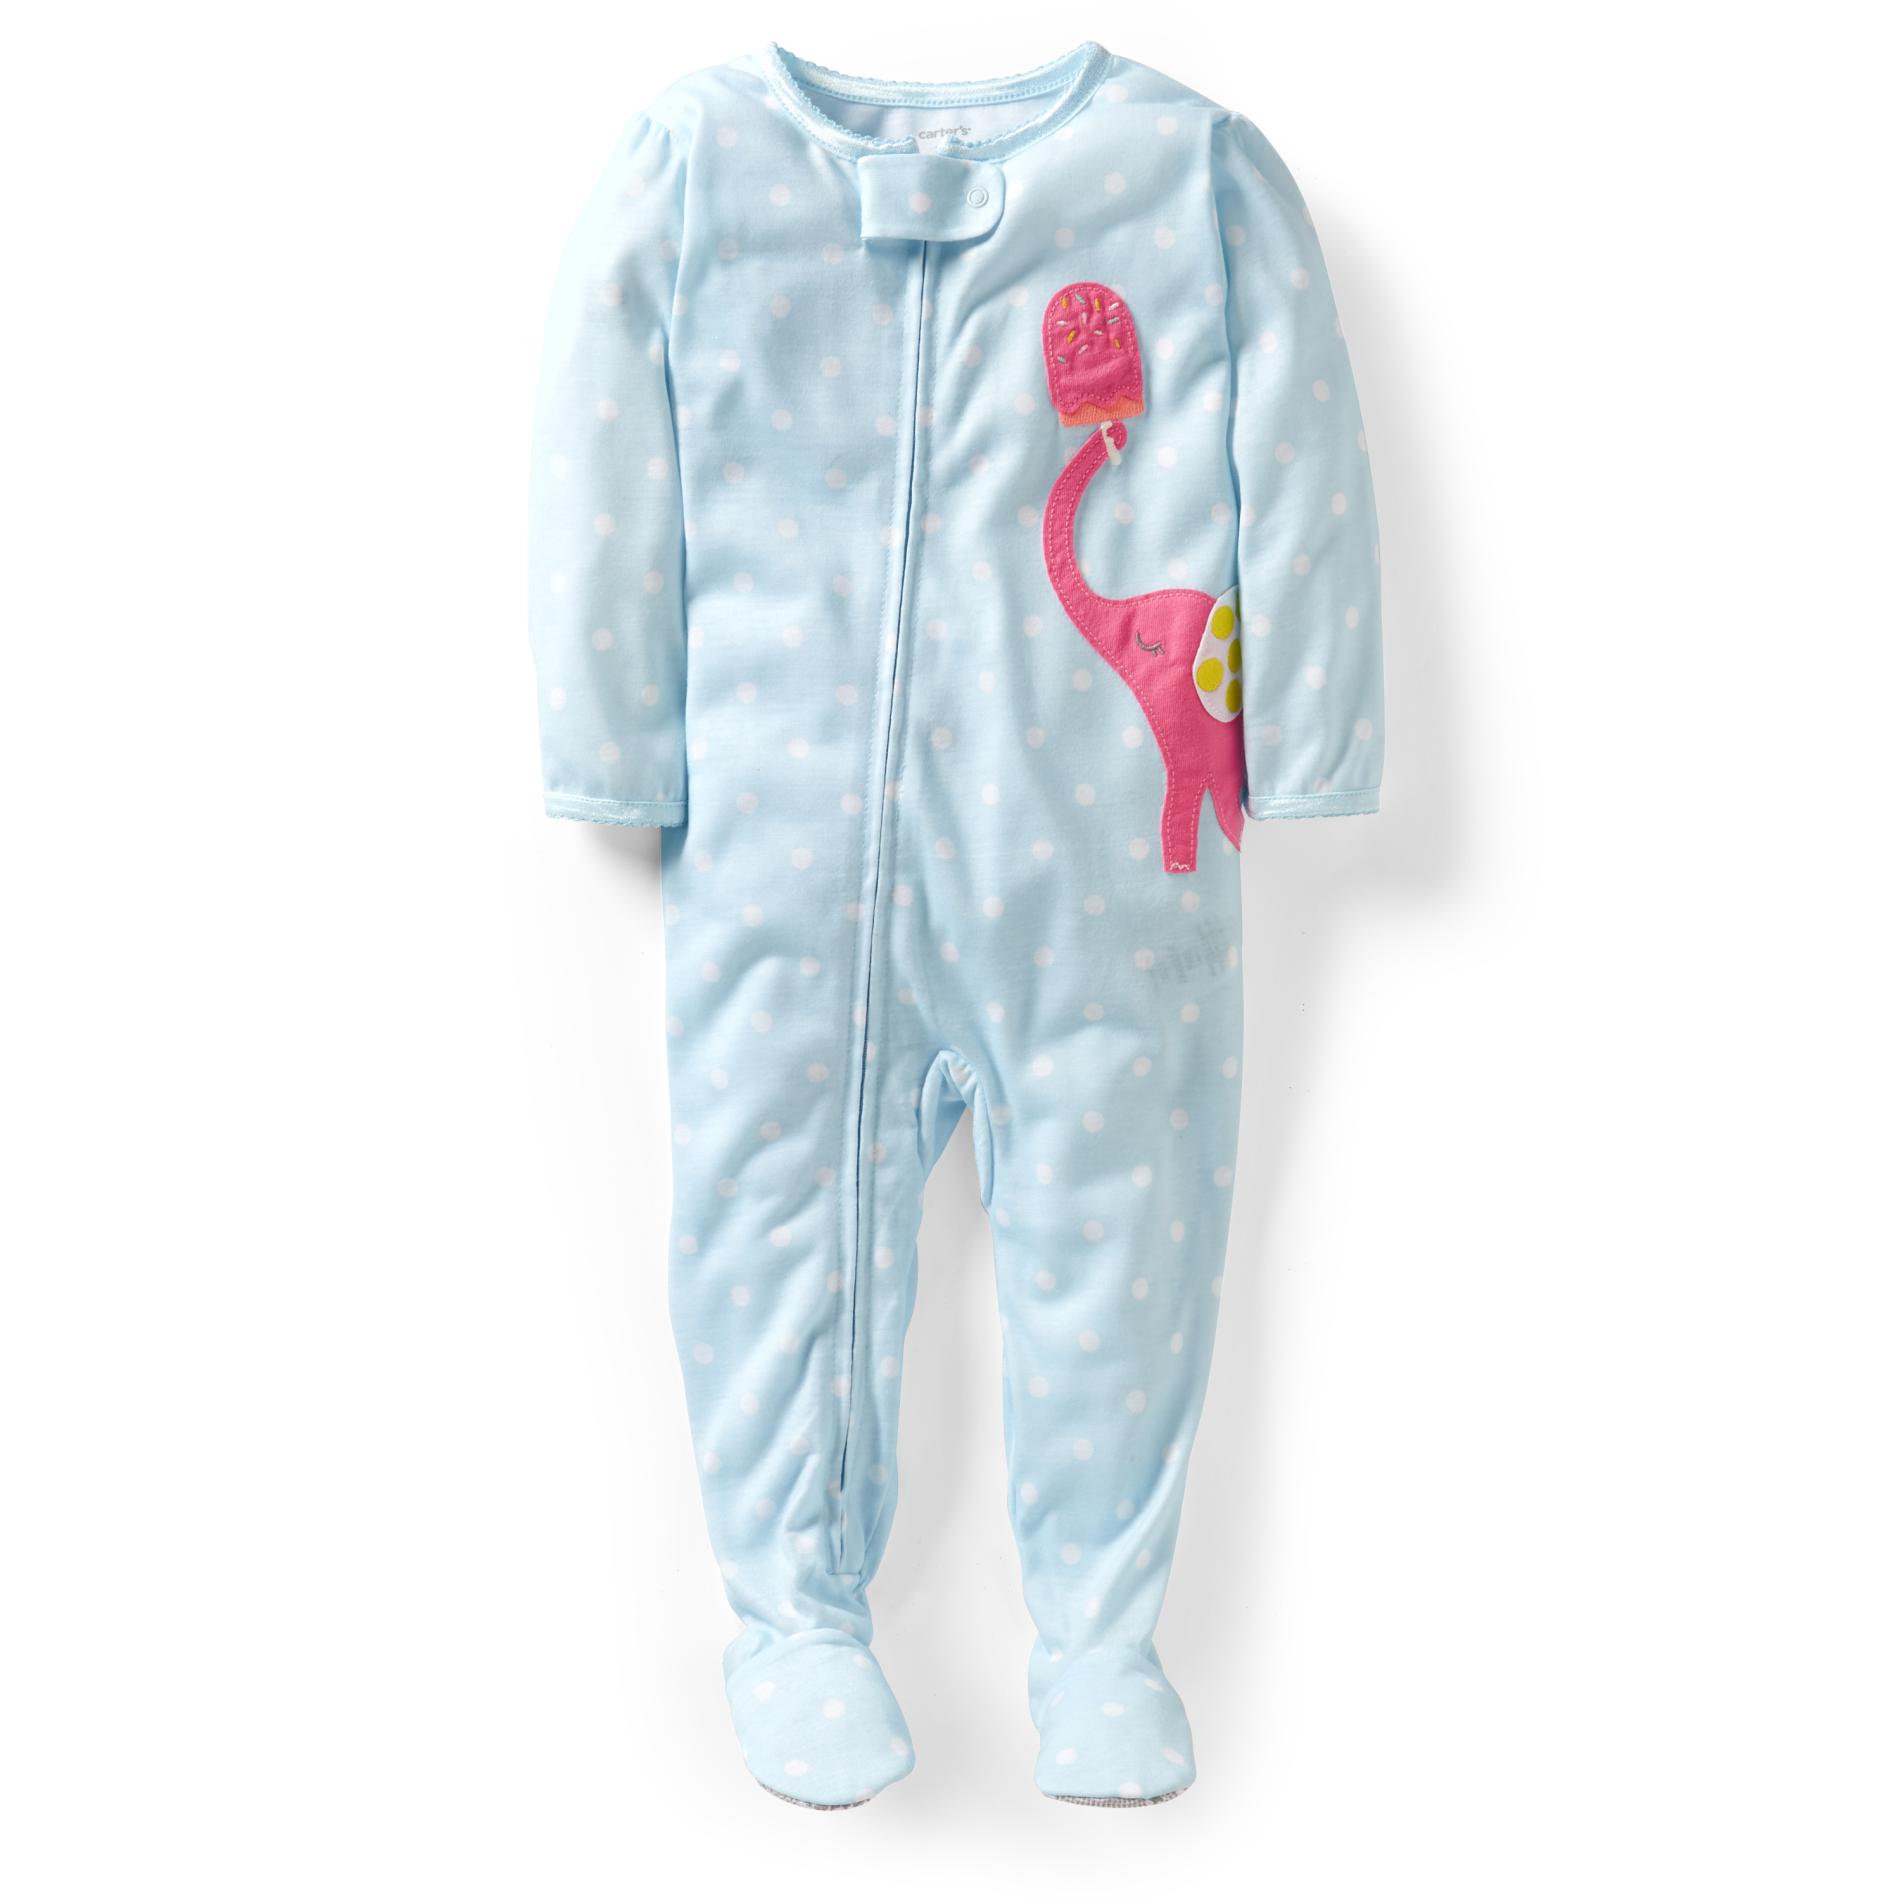 Carter's Infant & Toddler Girl's Footed Sleeper Pajamas - Elephant